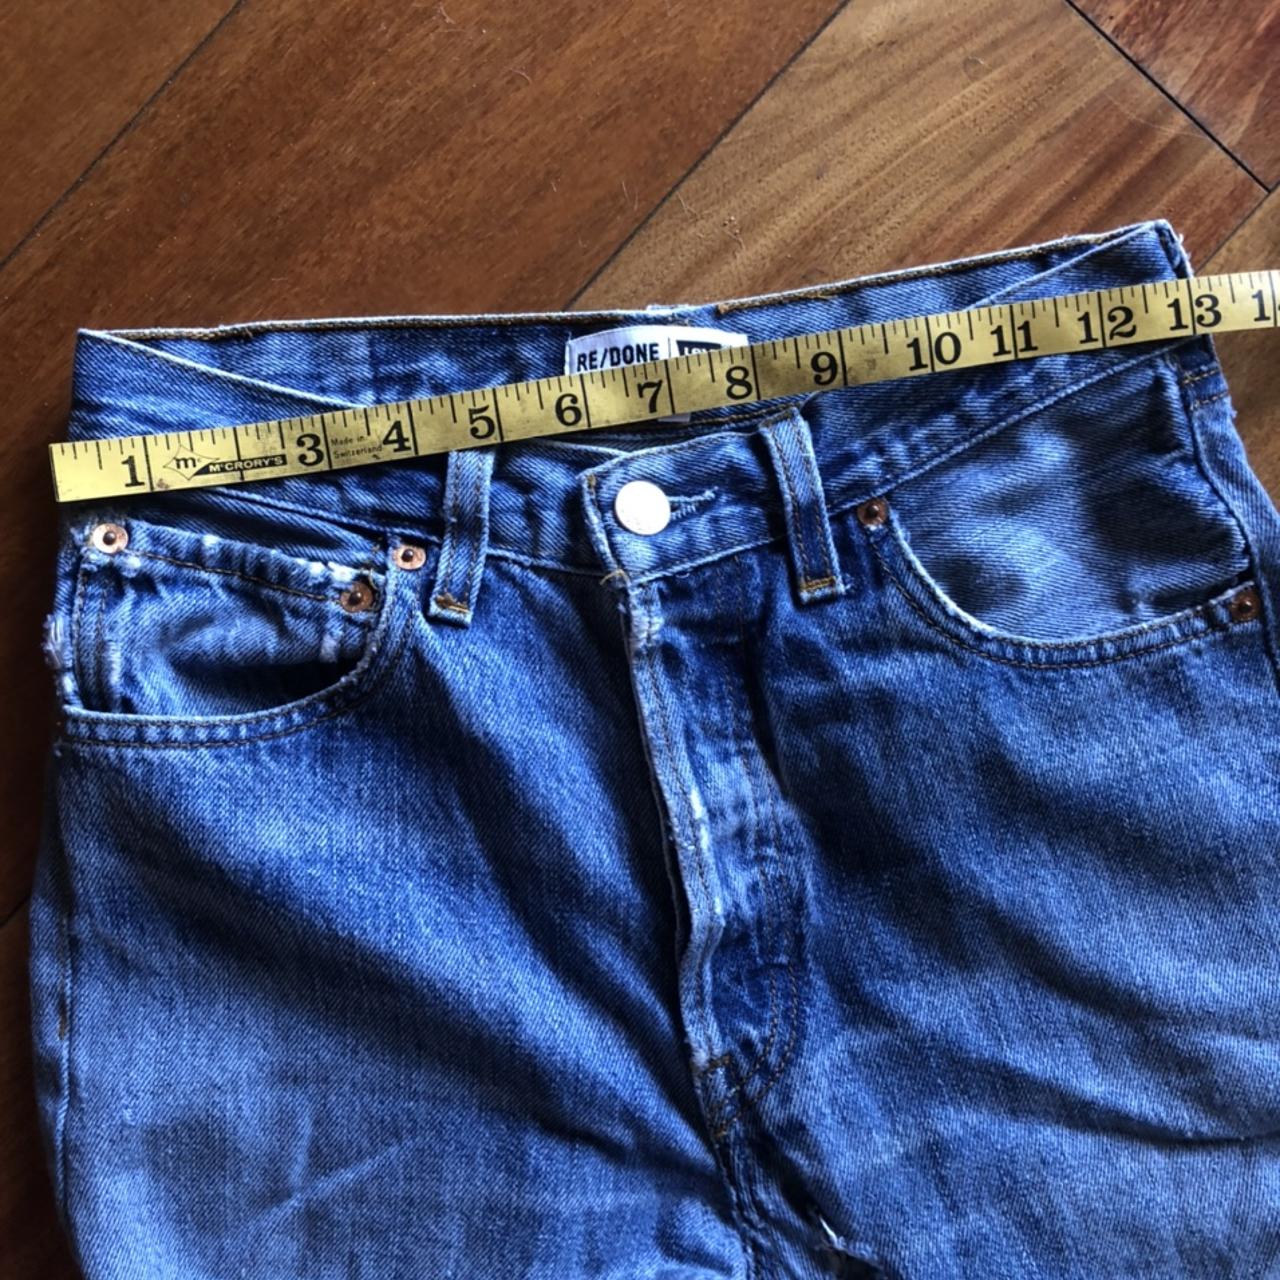 Requested pictures showing measurements of re/done... - Depop